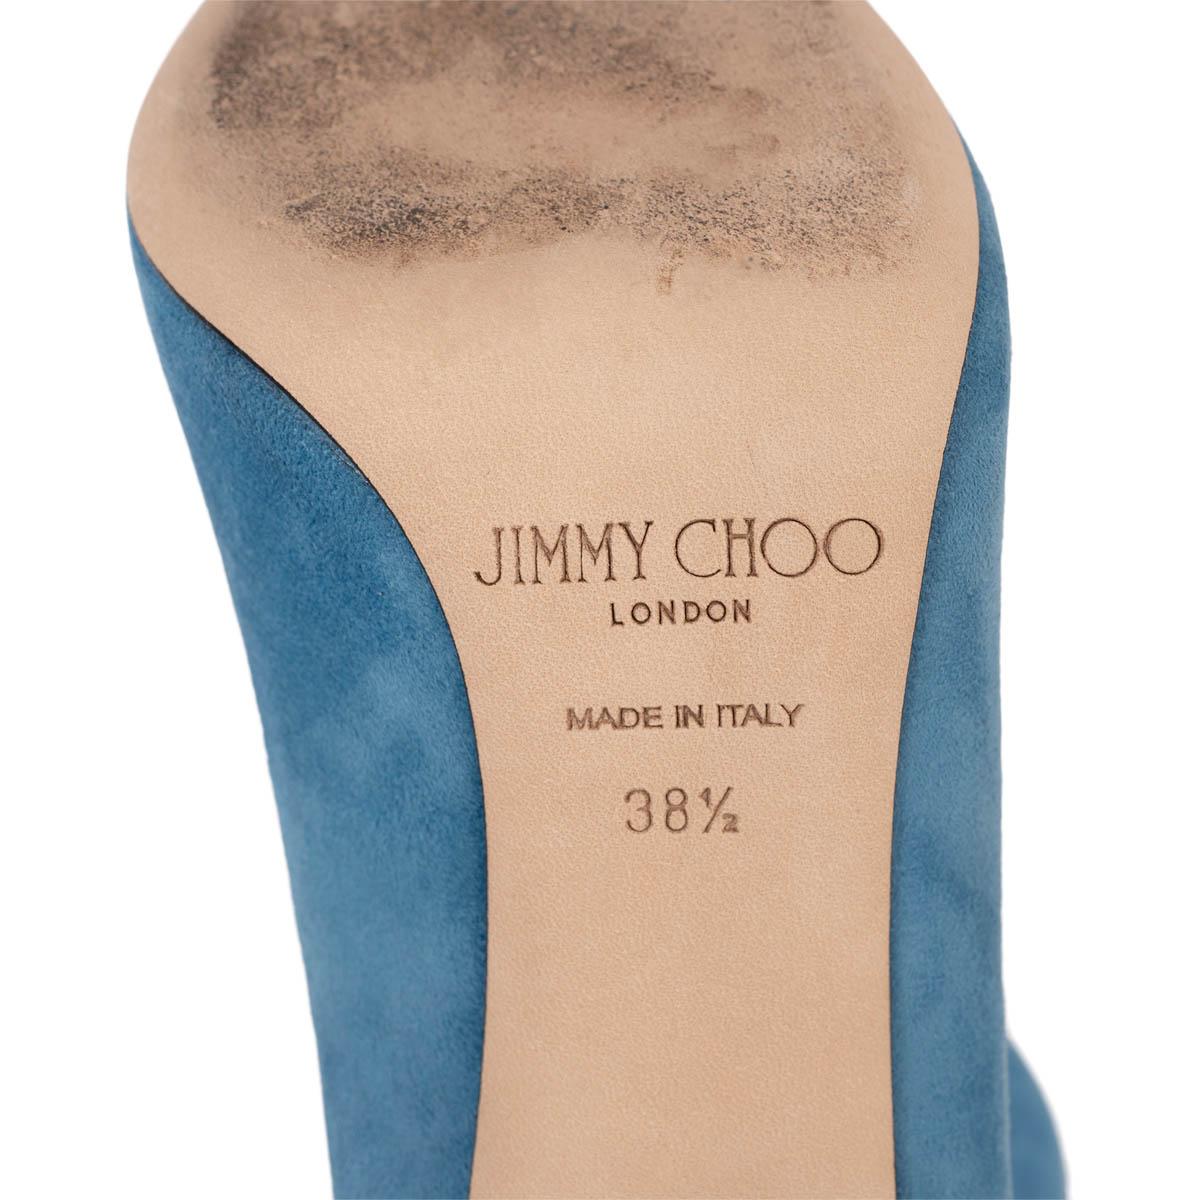 JIMMY CHOO Robot blue suede ROMY 100 Pumps Shoes 38.5 For Sale 4